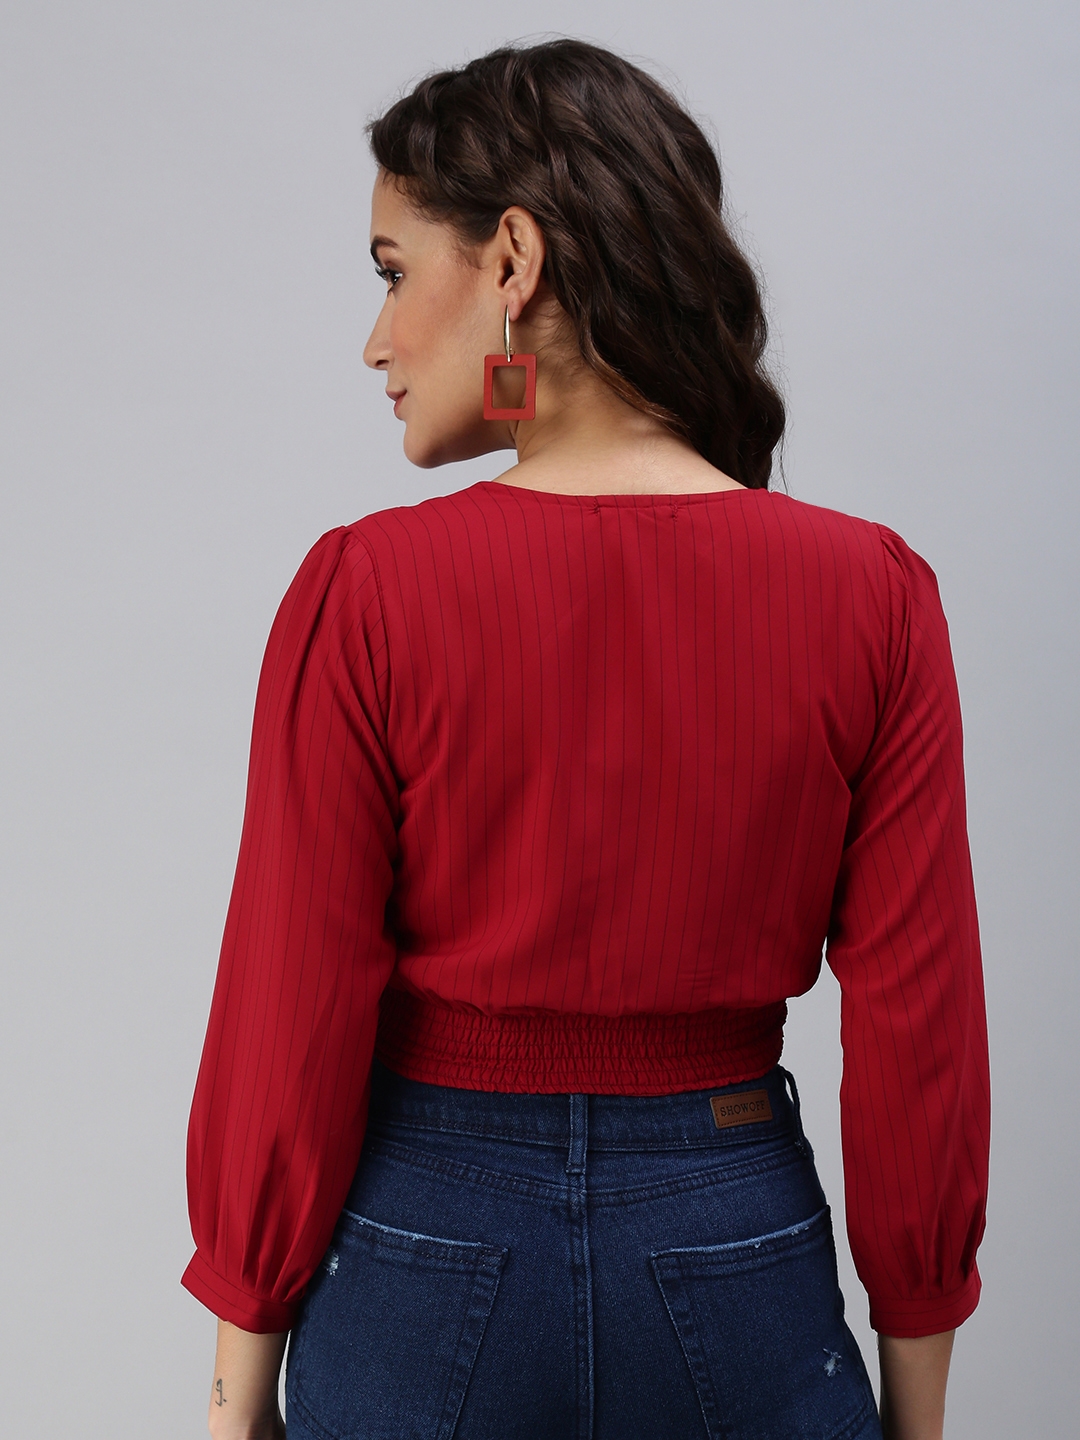 Women's Red Polyester Striped Tops